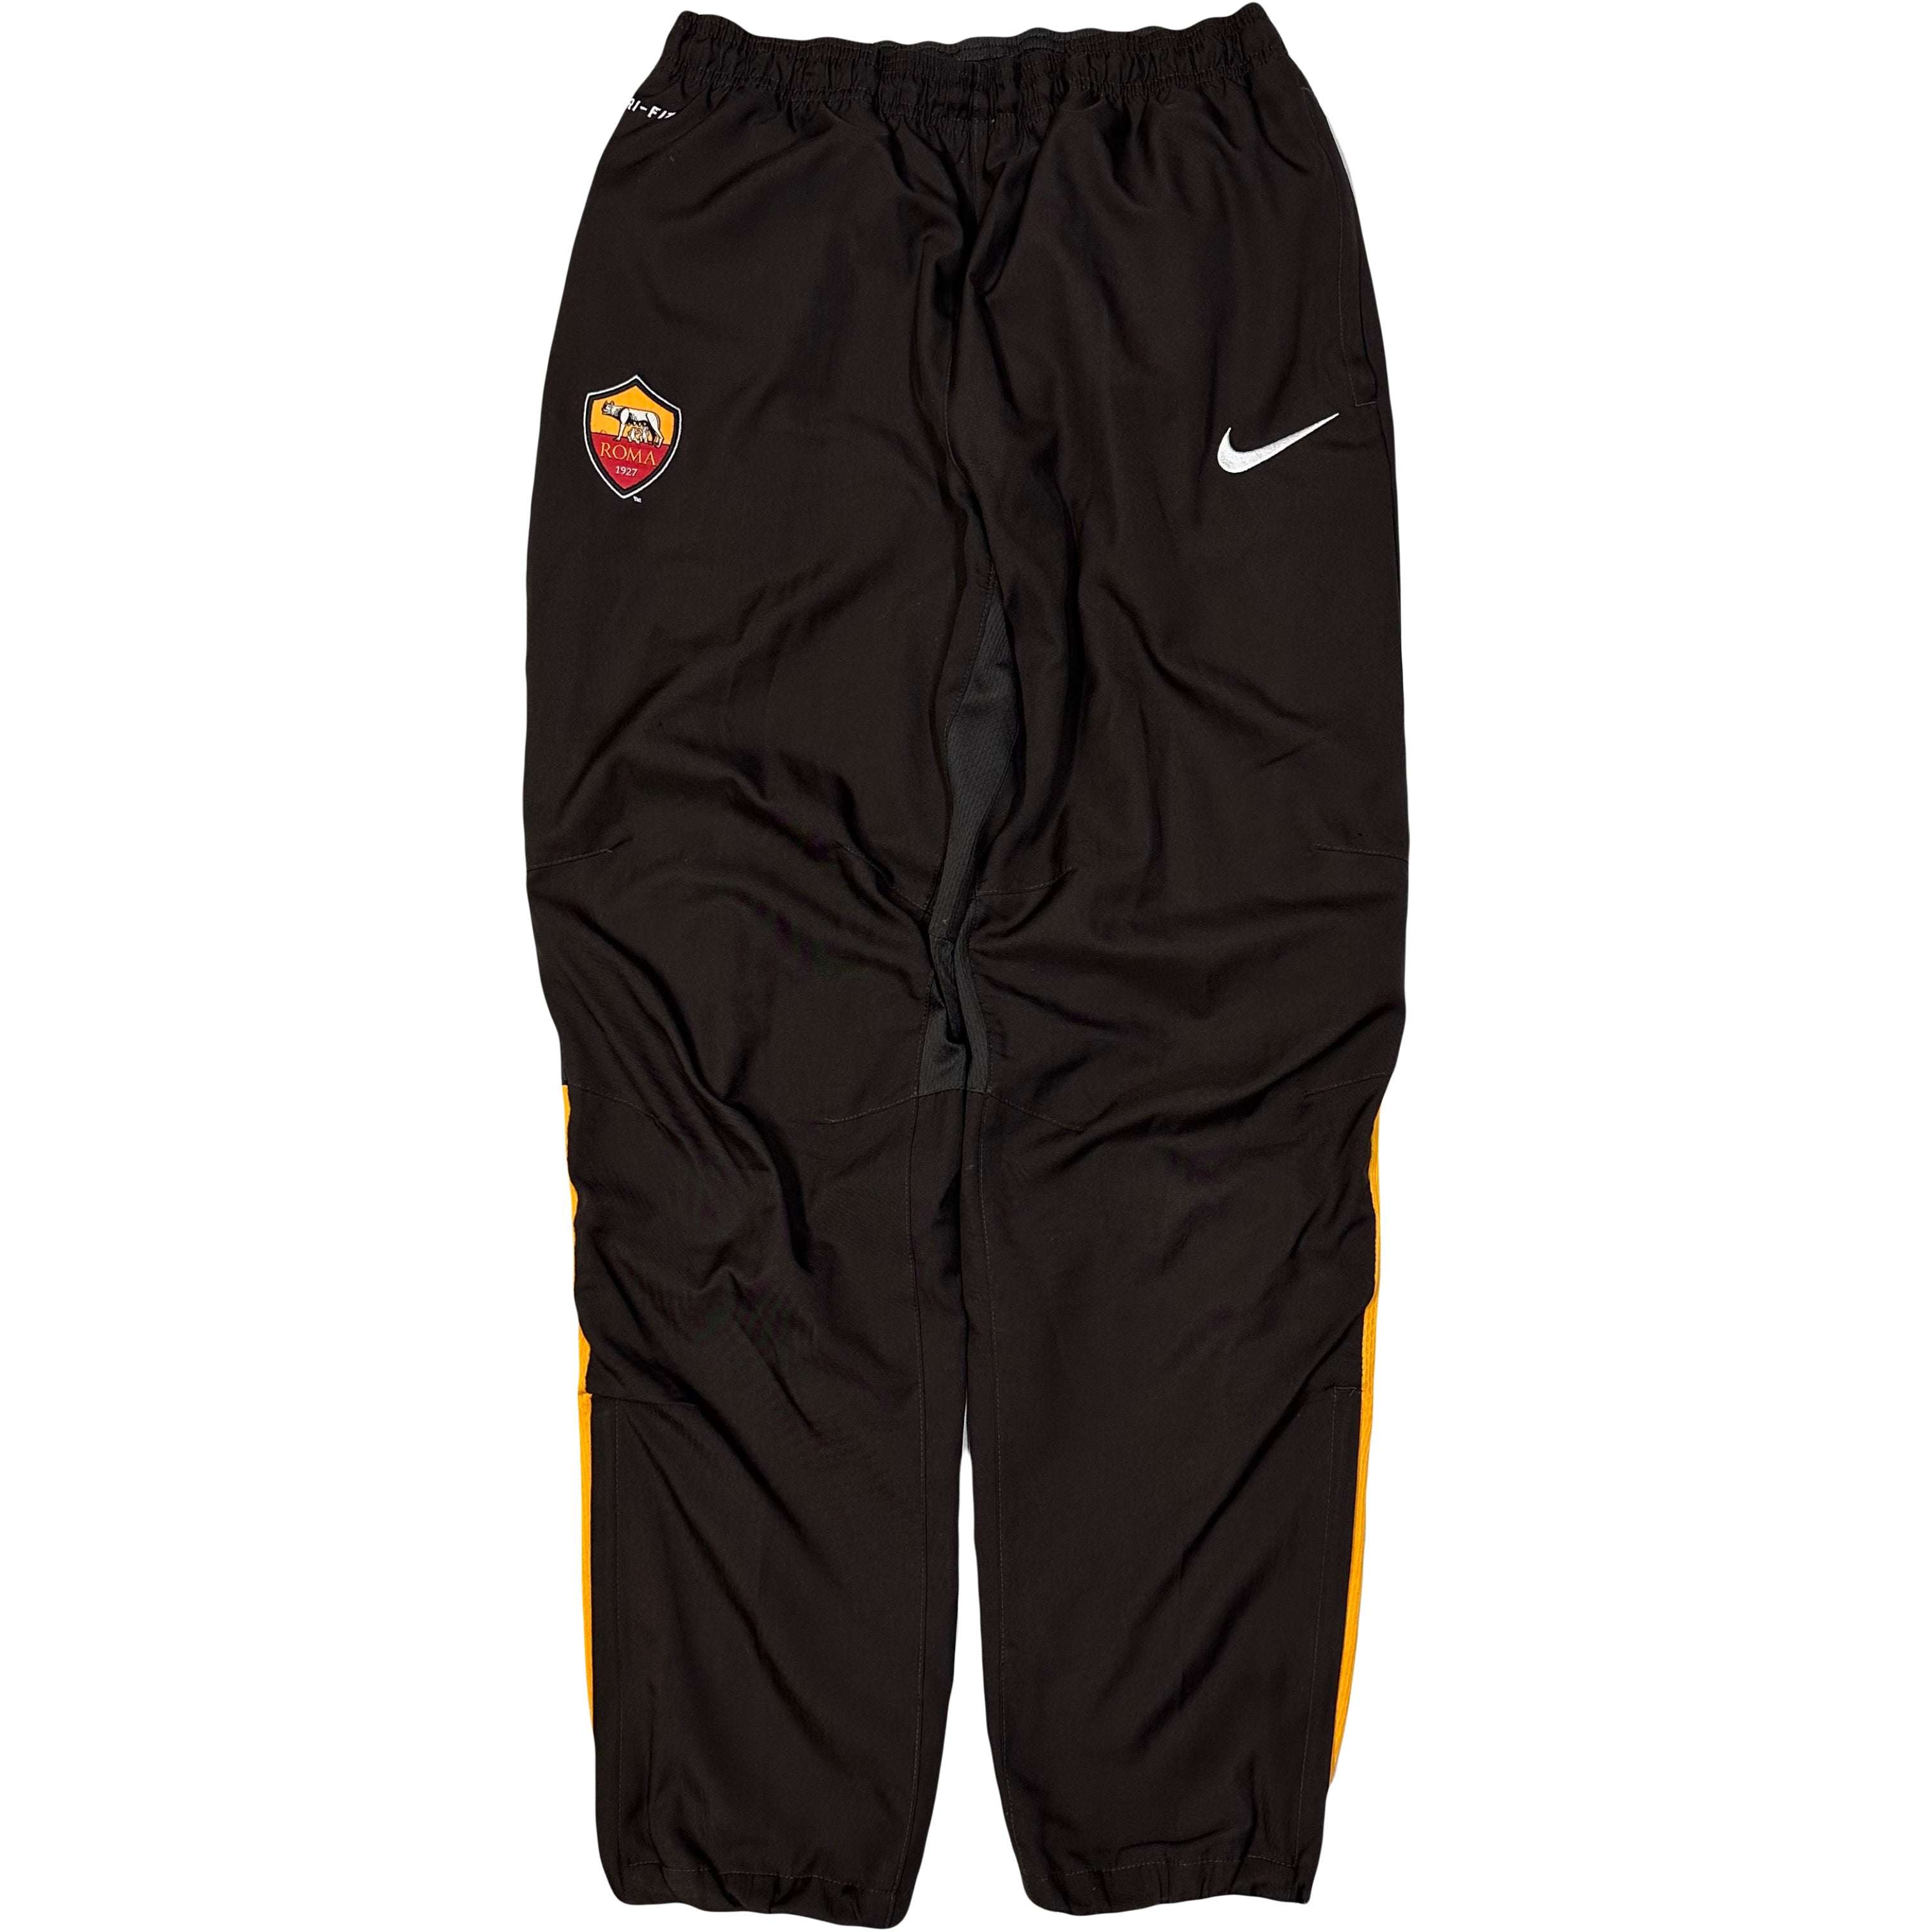 Nike Roma 2014/15 Tracksuit Bottoms In Brown ( XL )